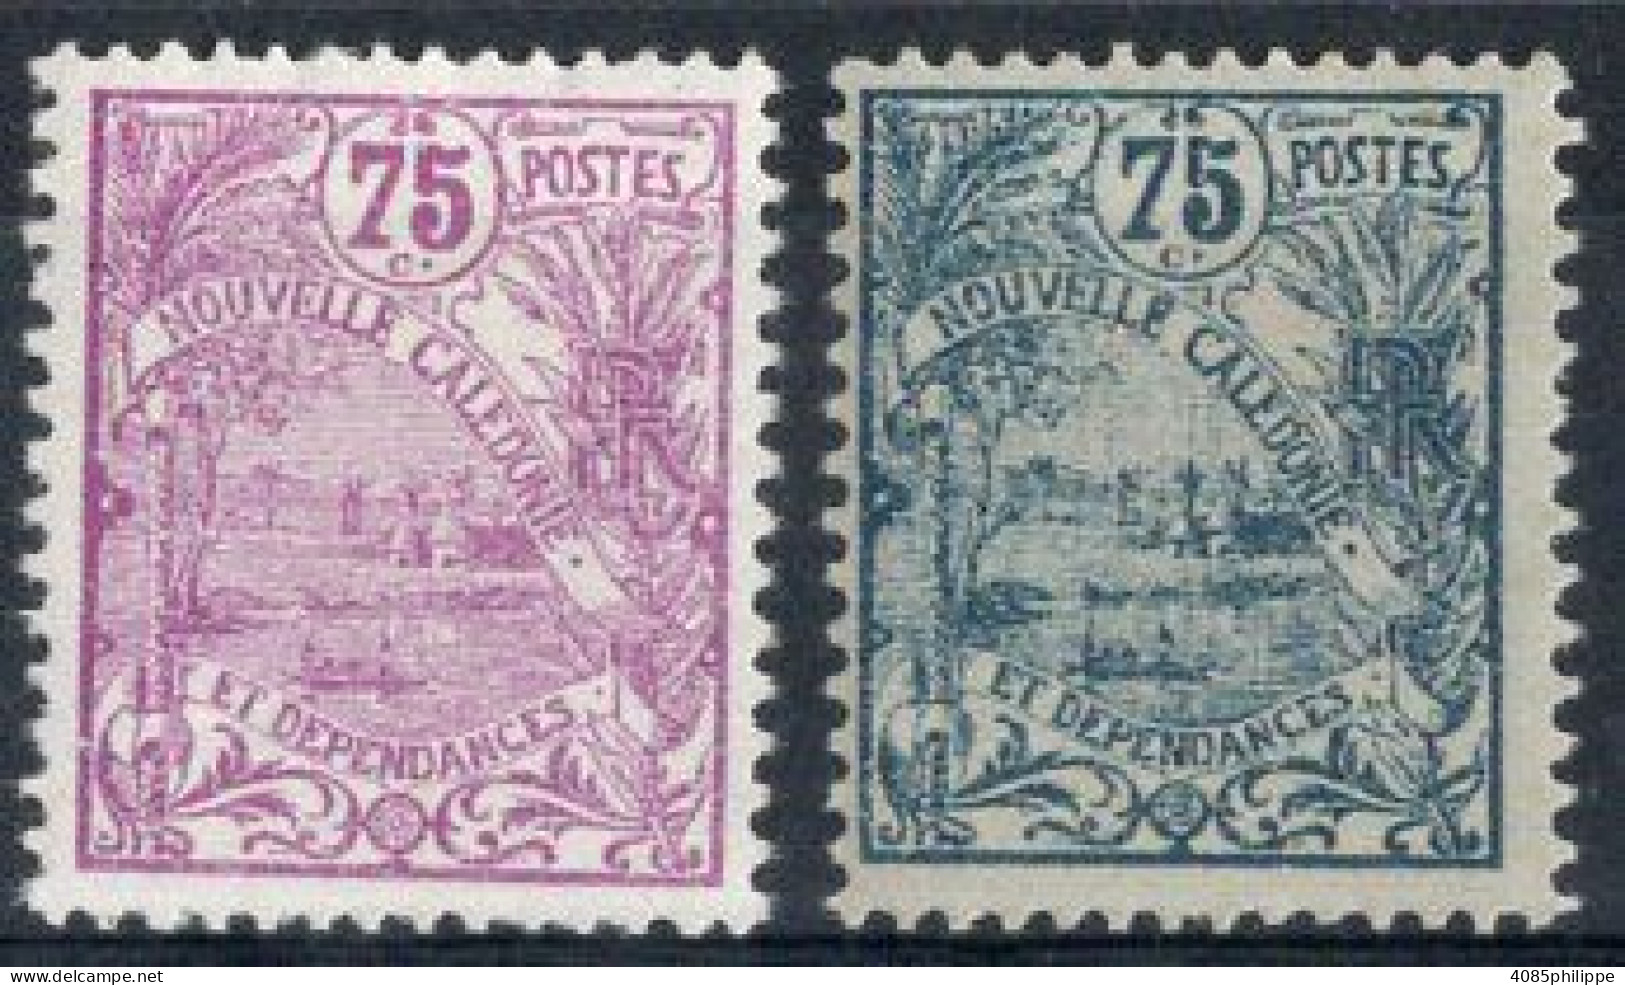 Nvelle CALEDONIE Timbres-Poste N°123* & 124* Neufs Charnières TB Cote : 2€50 - Unused Stamps